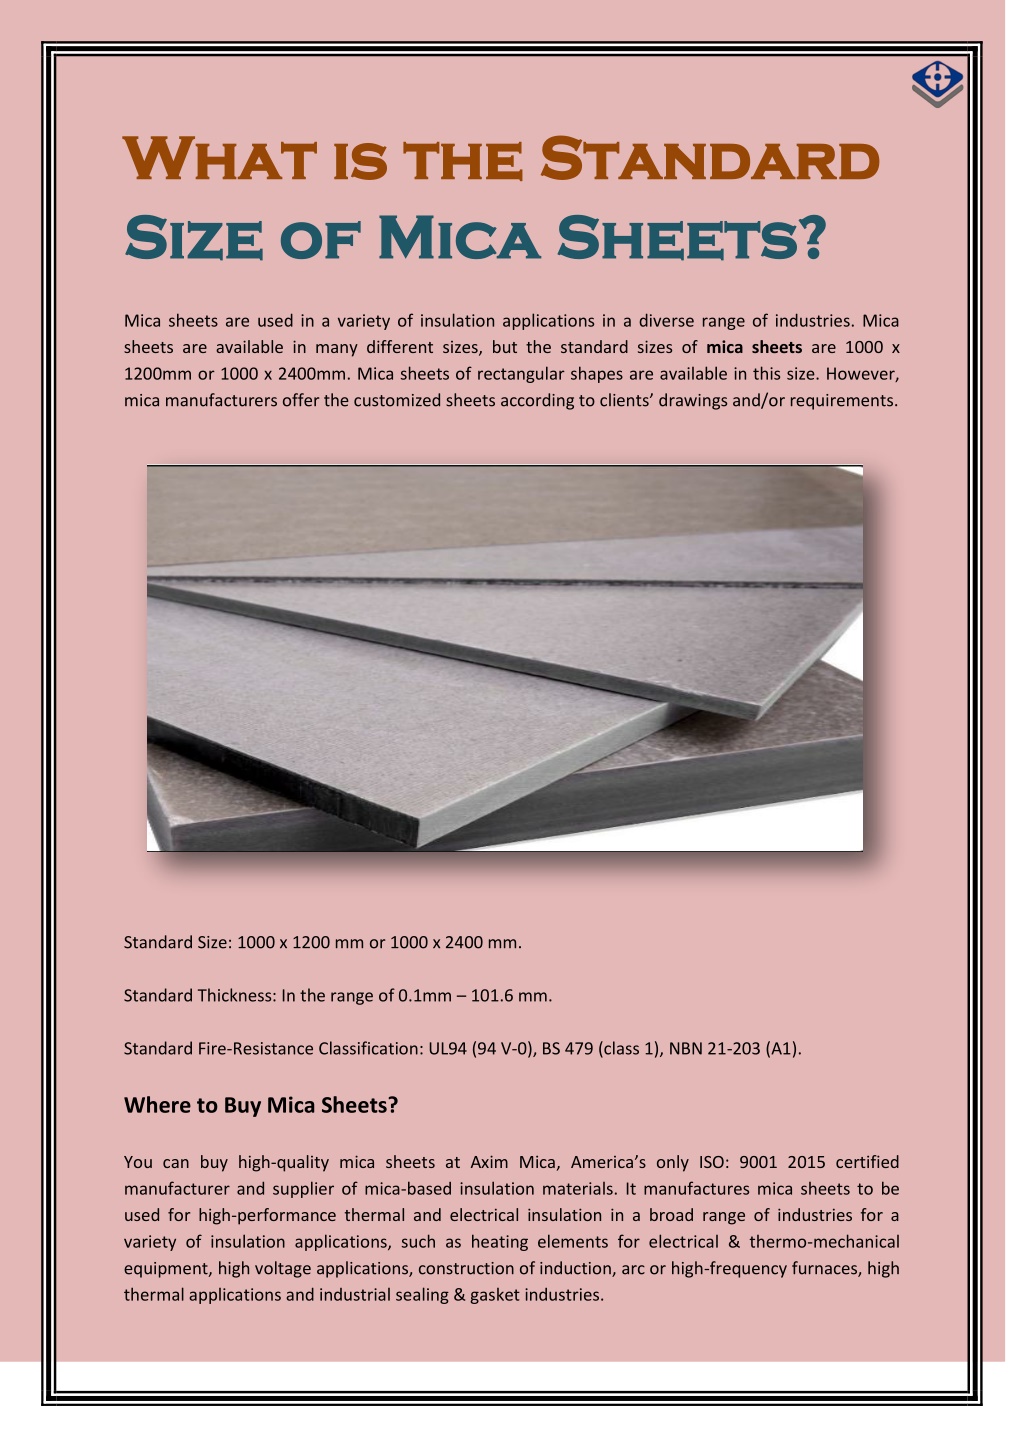 PPT - What is the Standard Size of Mica Sheets? PowerPoint